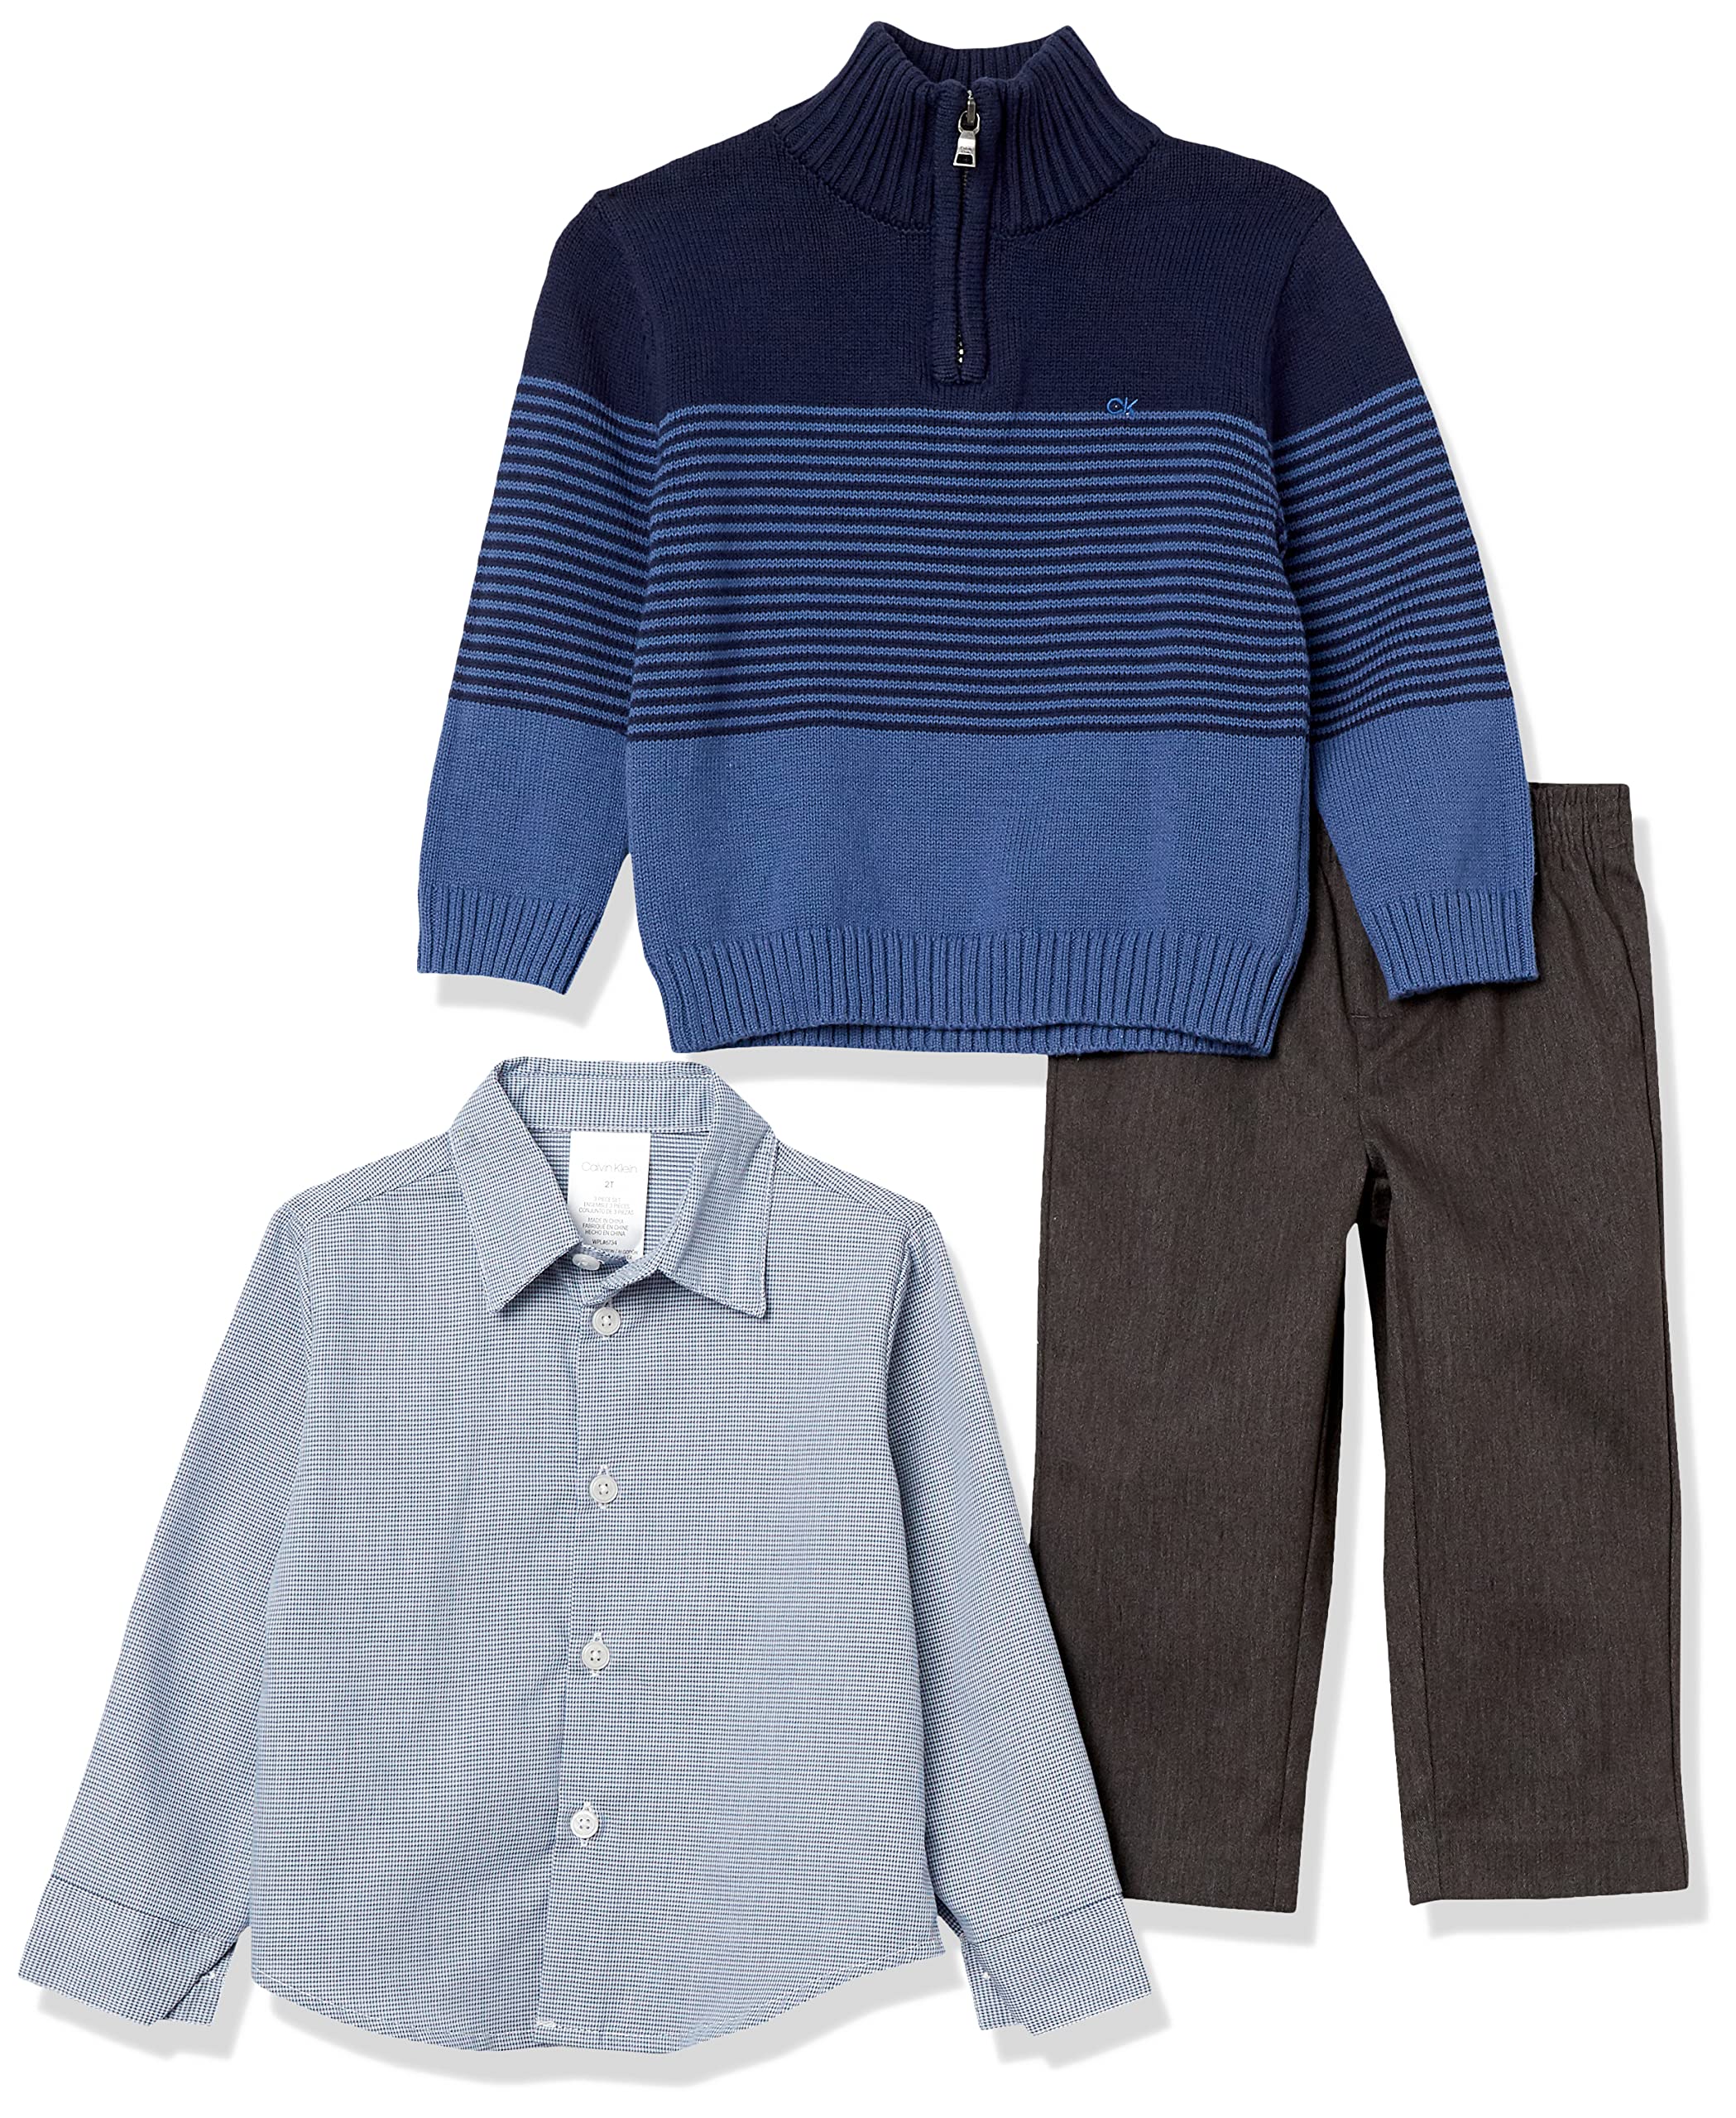 Calvin Klein boys 3-piece Sweater Set With Matching Button-down Shirt and Pants